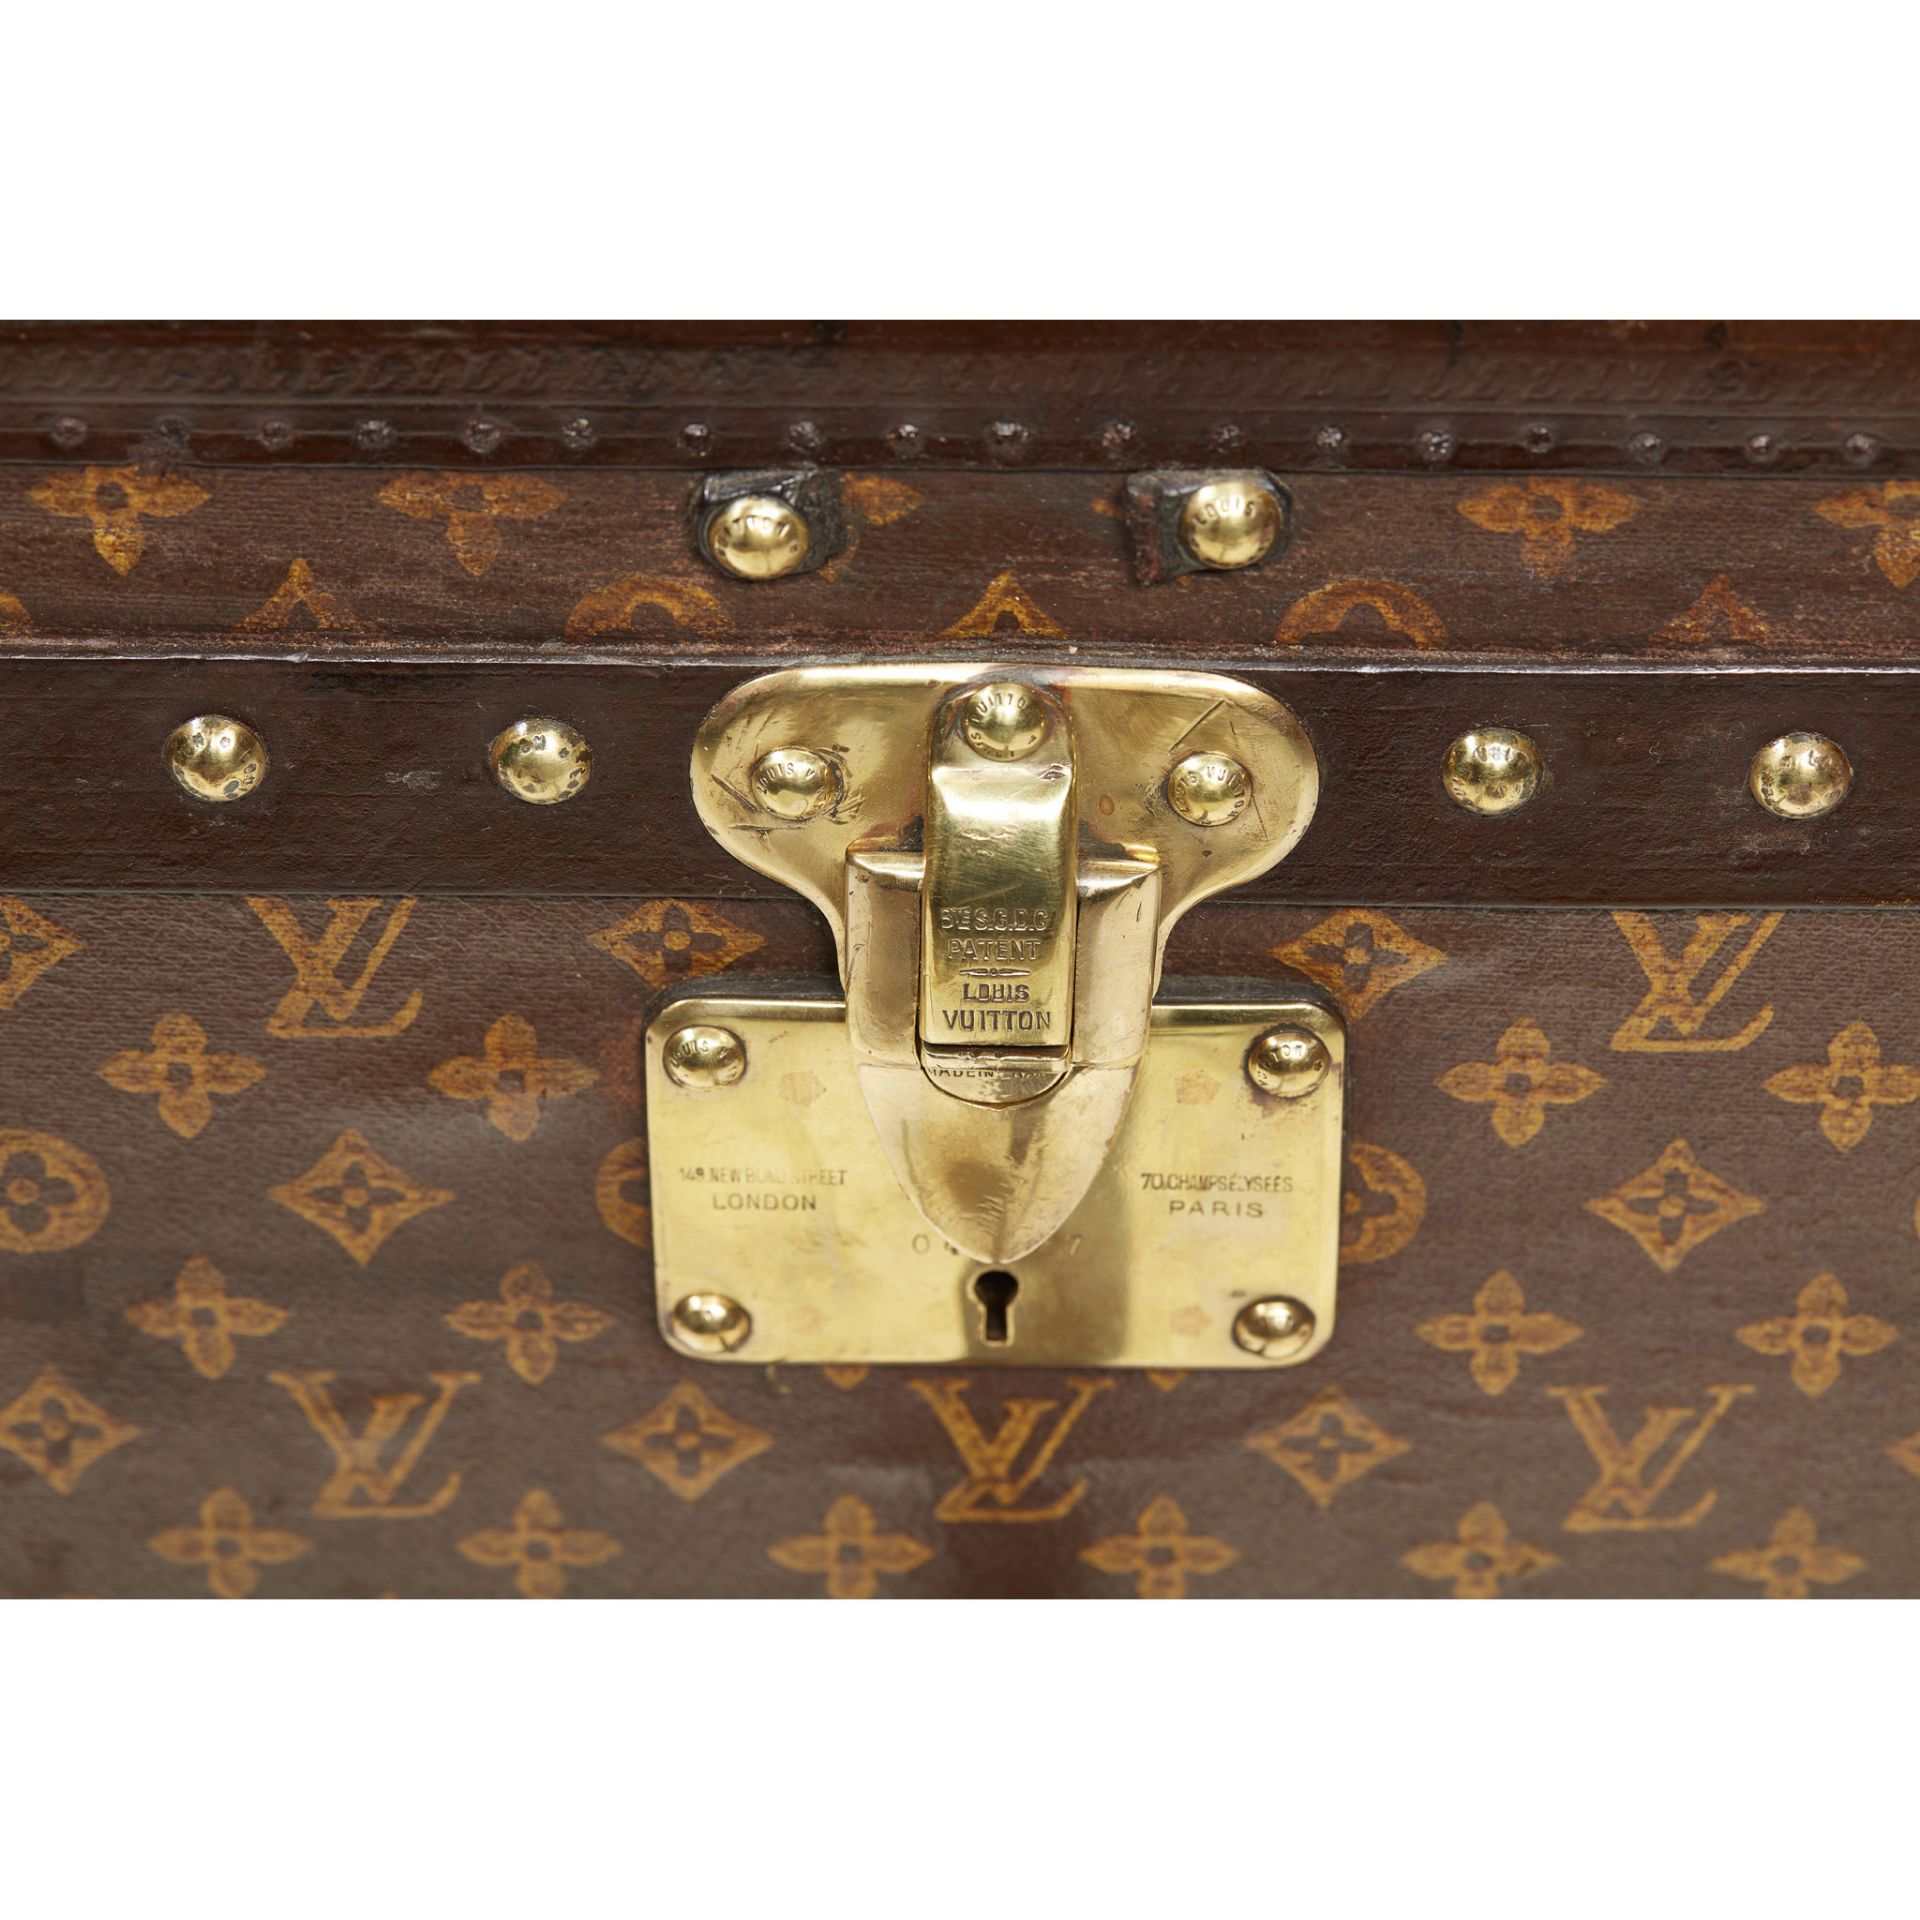 LOUIS VUITTON LARGE TRUNK EARLY 20TH CENTURY - Image 2 of 3